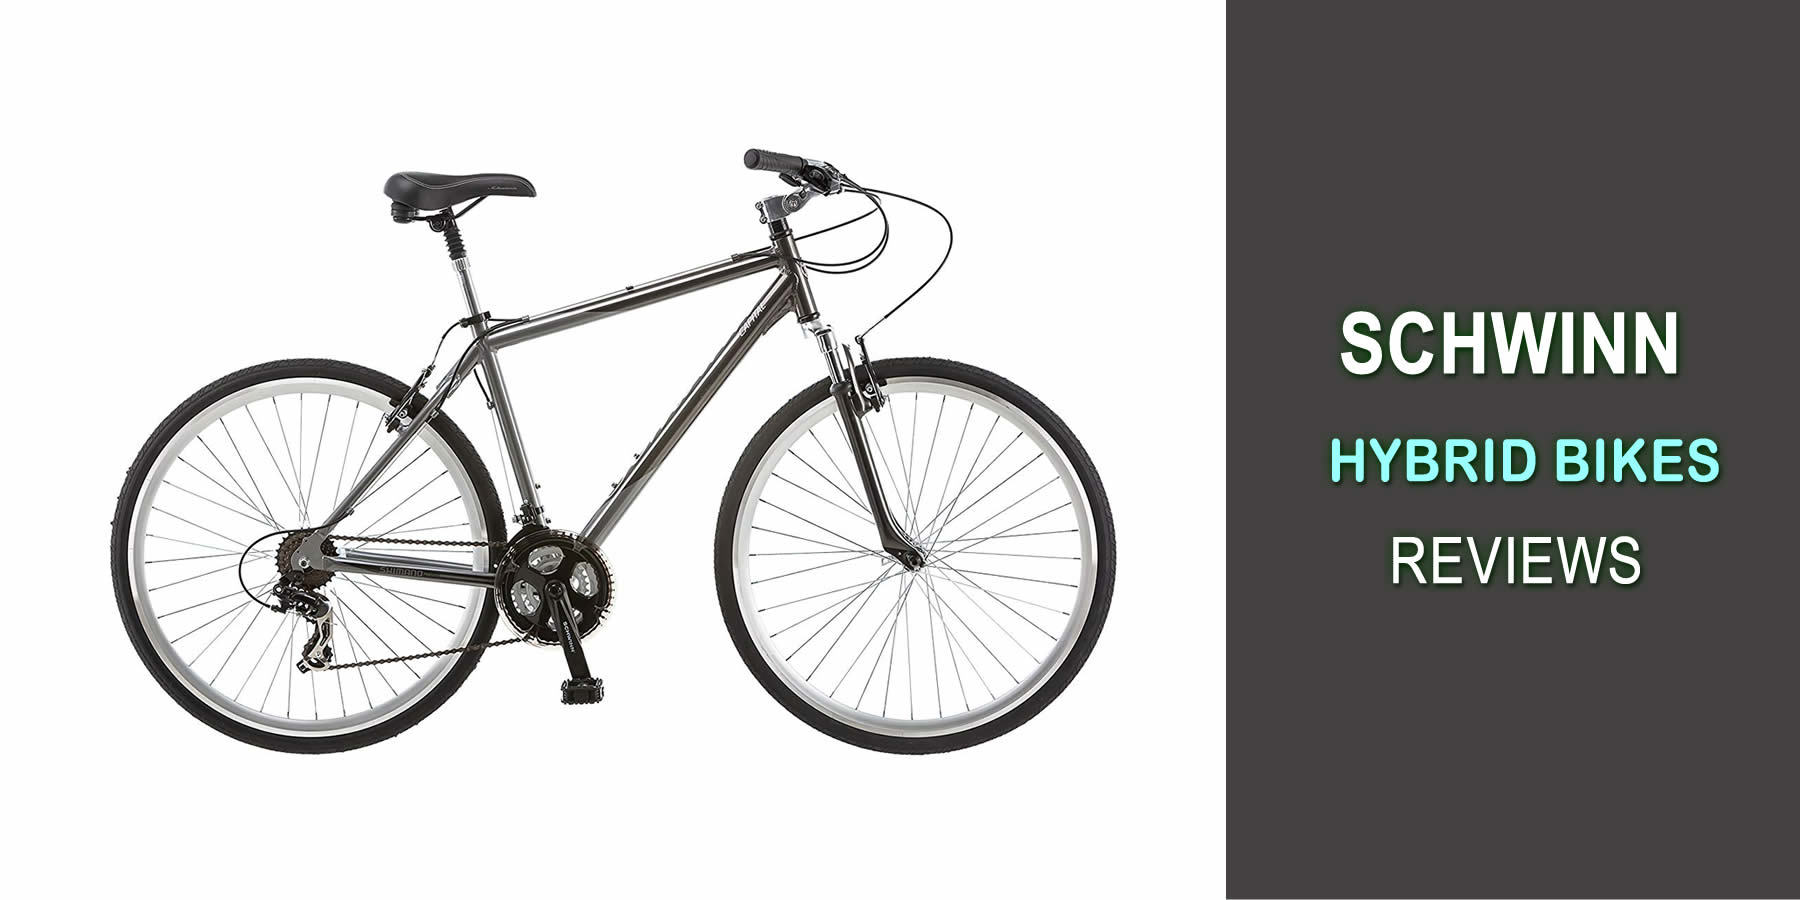 Schwinn Hybrid Bikes Reviews For 2019 – Check Our Six Top-Rated Bike Review!